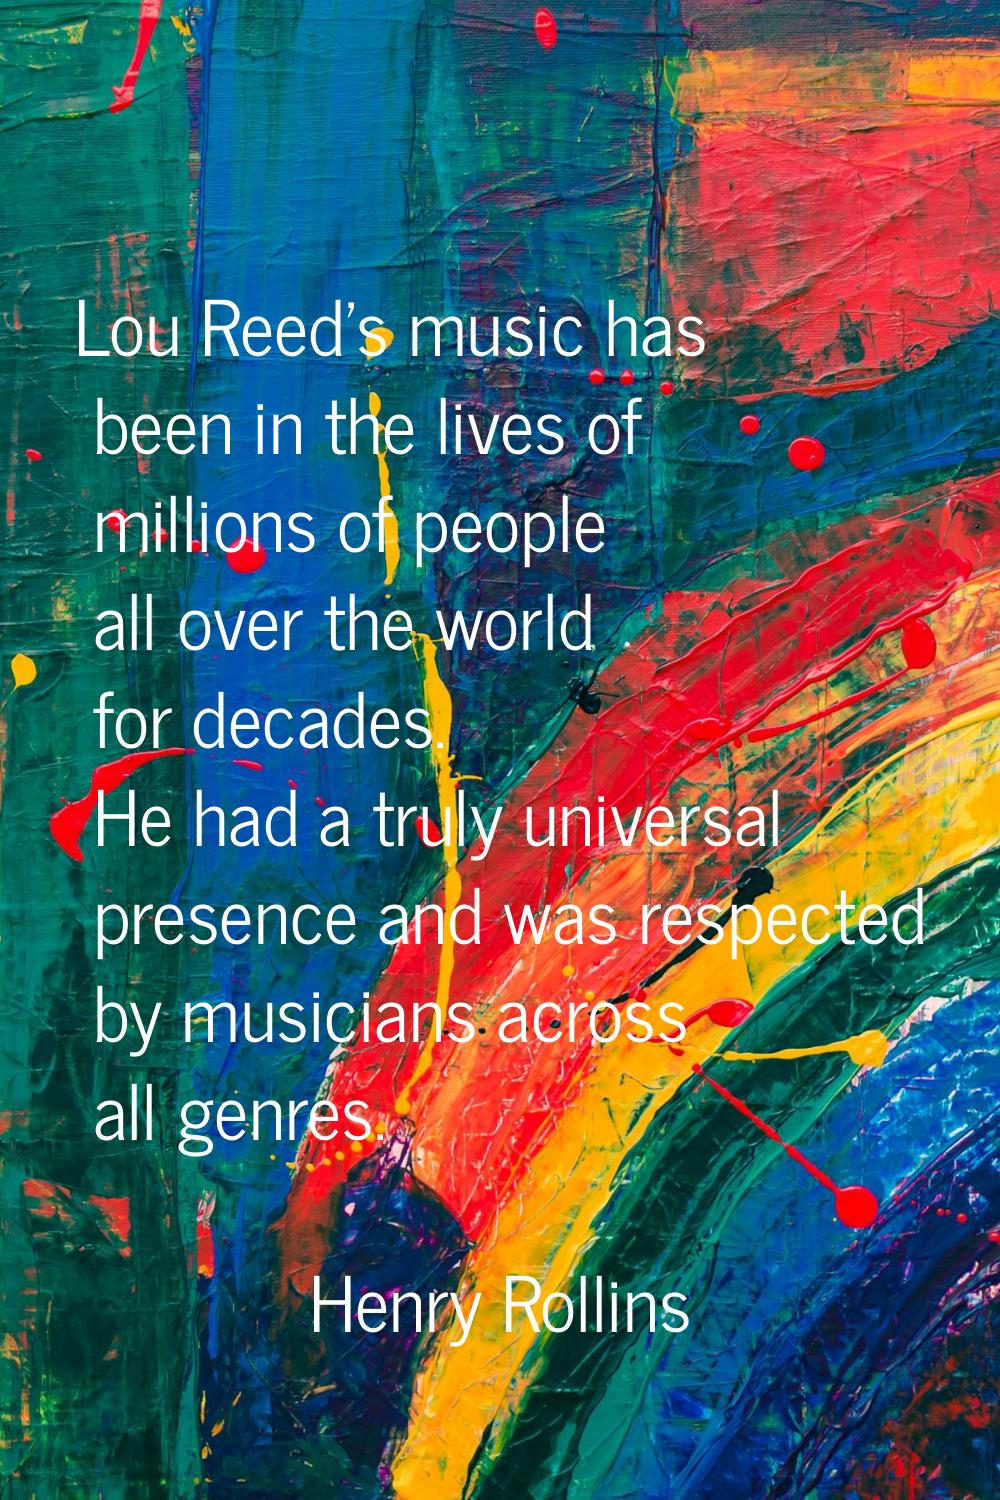 Lou Reed's music has been in the lives of millions of people all over the world for decades. He had